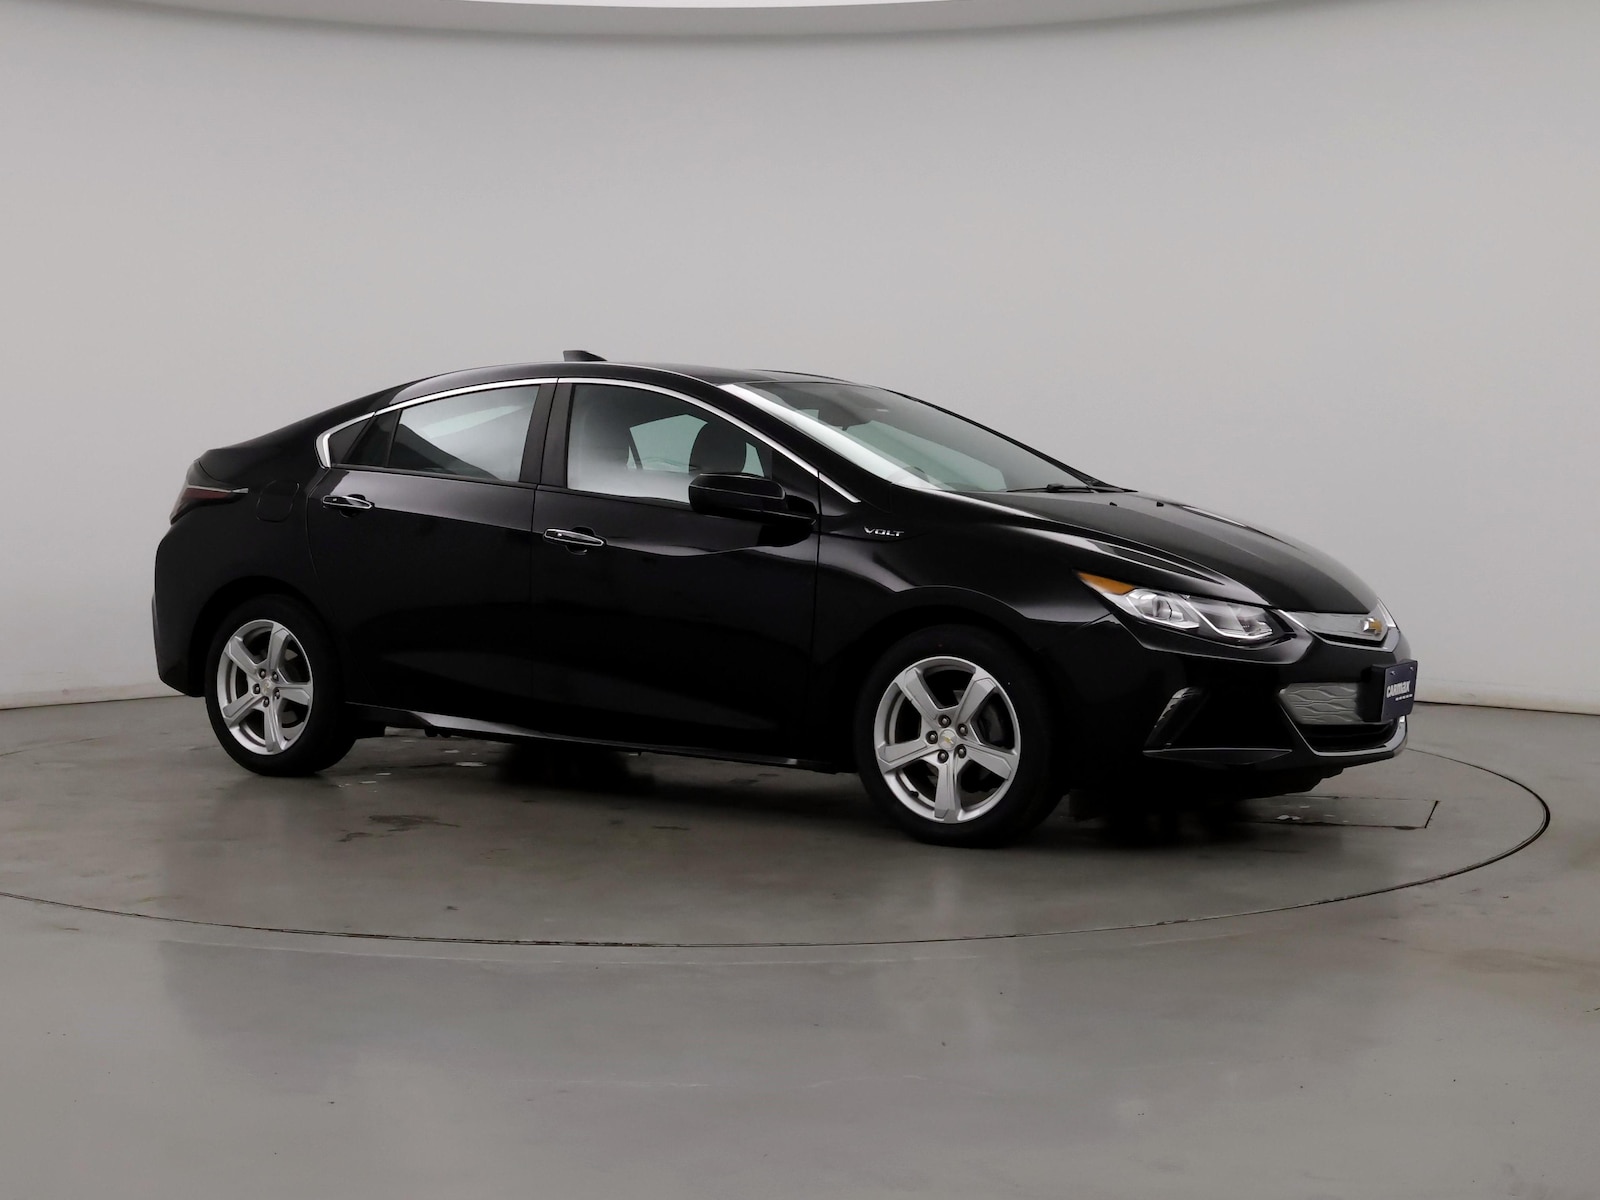 Used 2018 Chevrolet Volt LT with VIN 1G1RA6S56JU152836 for sale in Spokane Valley, WA